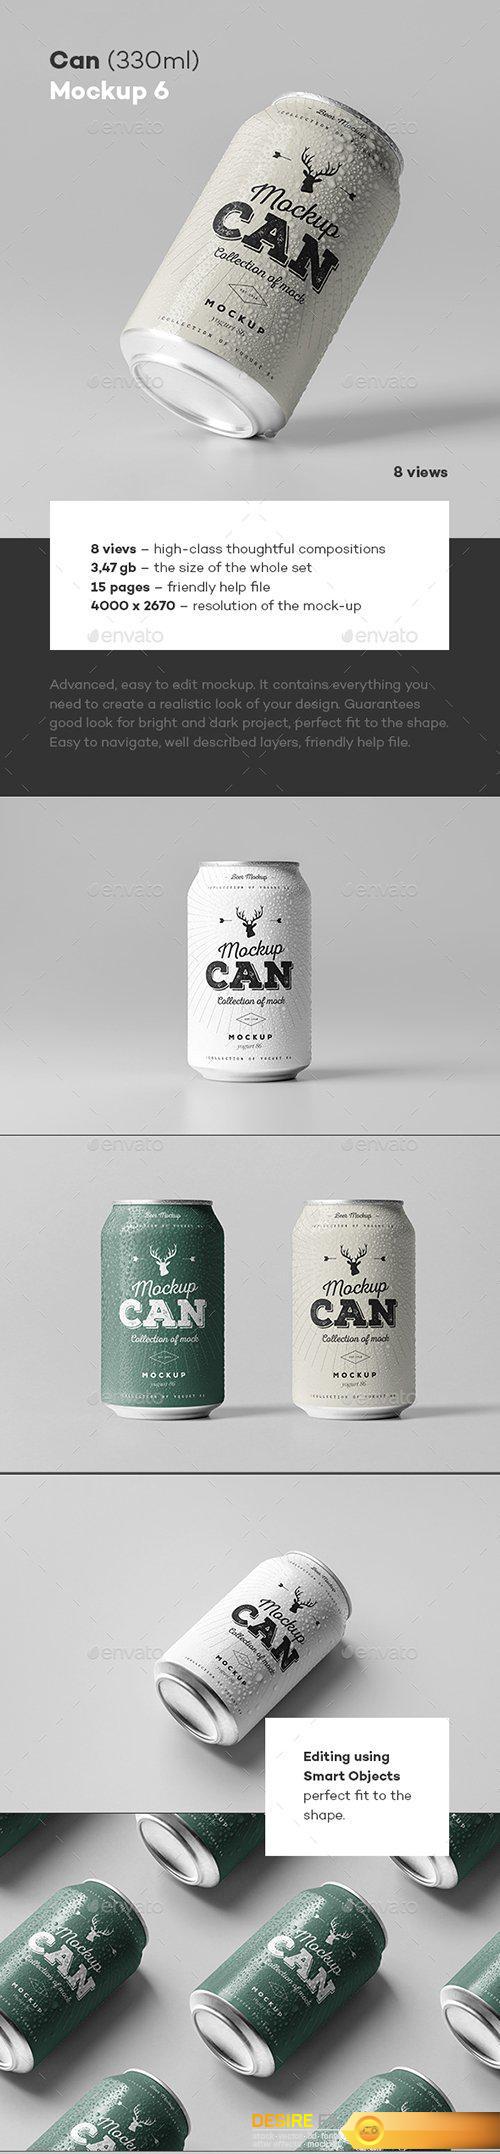 Graphicriver - Can Mock-up 6 22654175